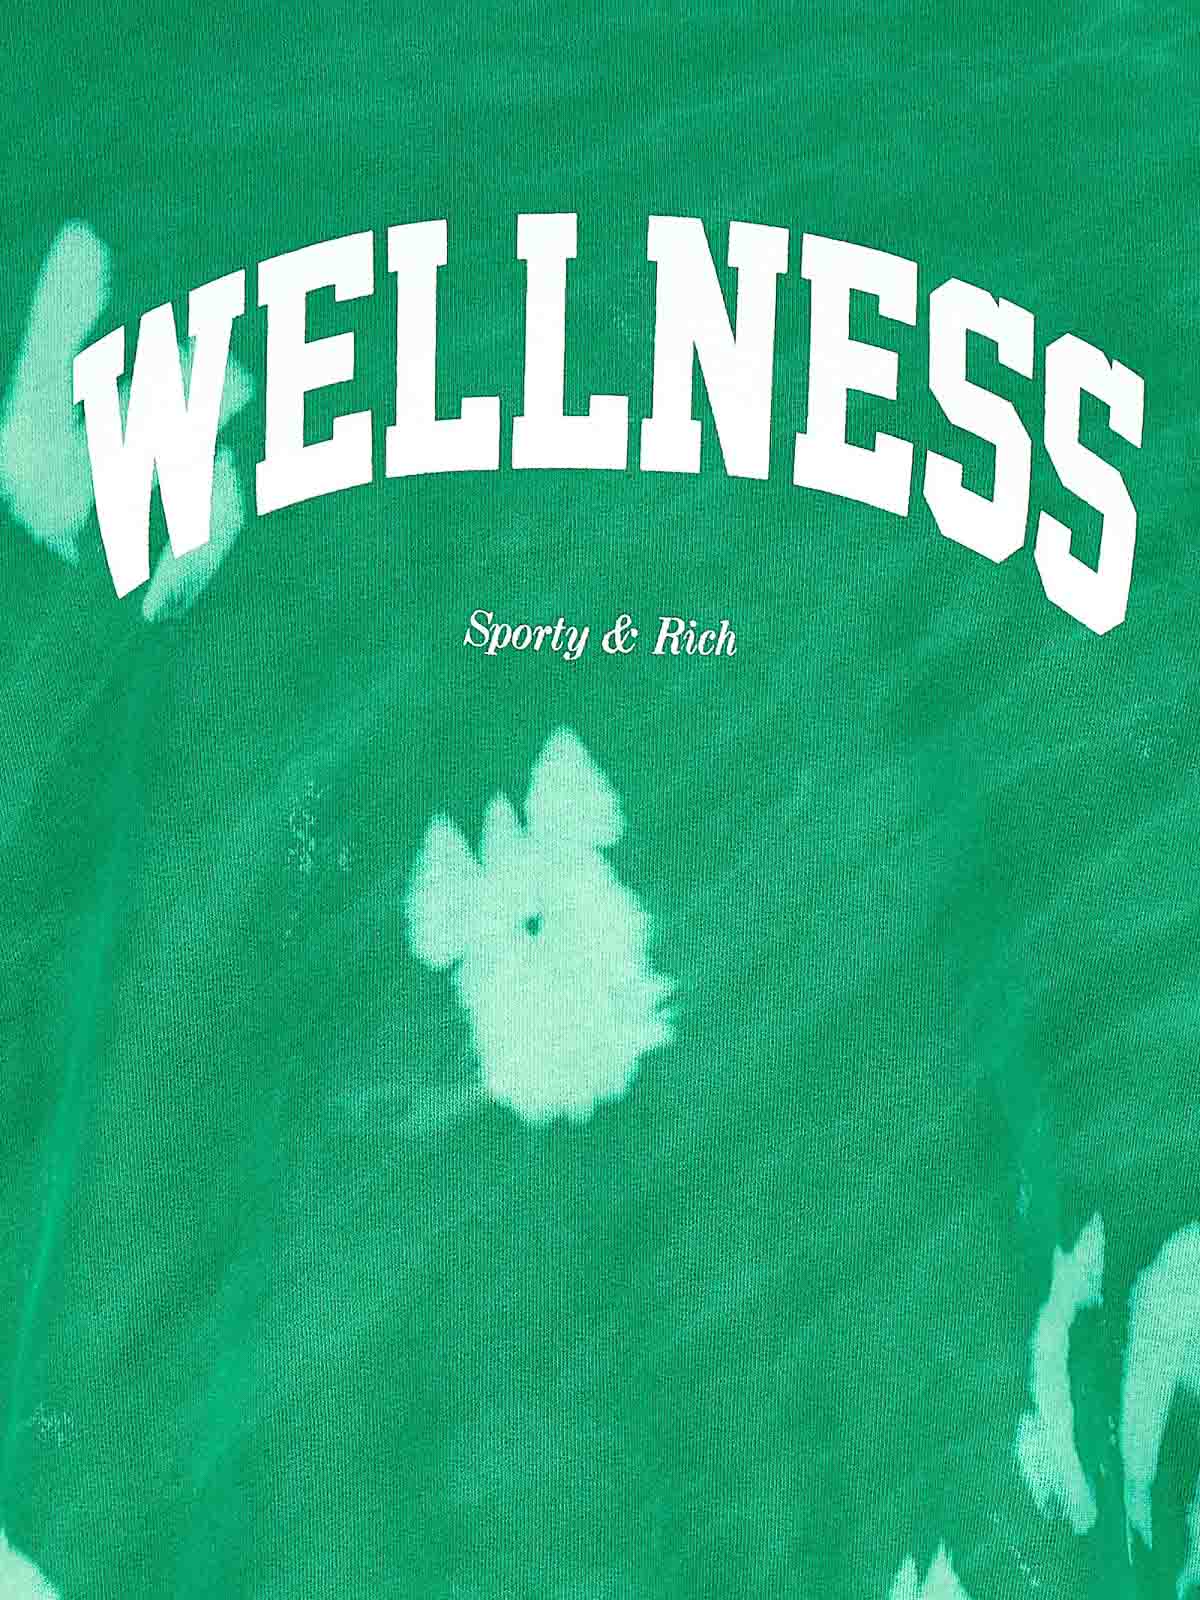 Shop Sporty And Rich Wellness Ivy Sweatshirt In Green